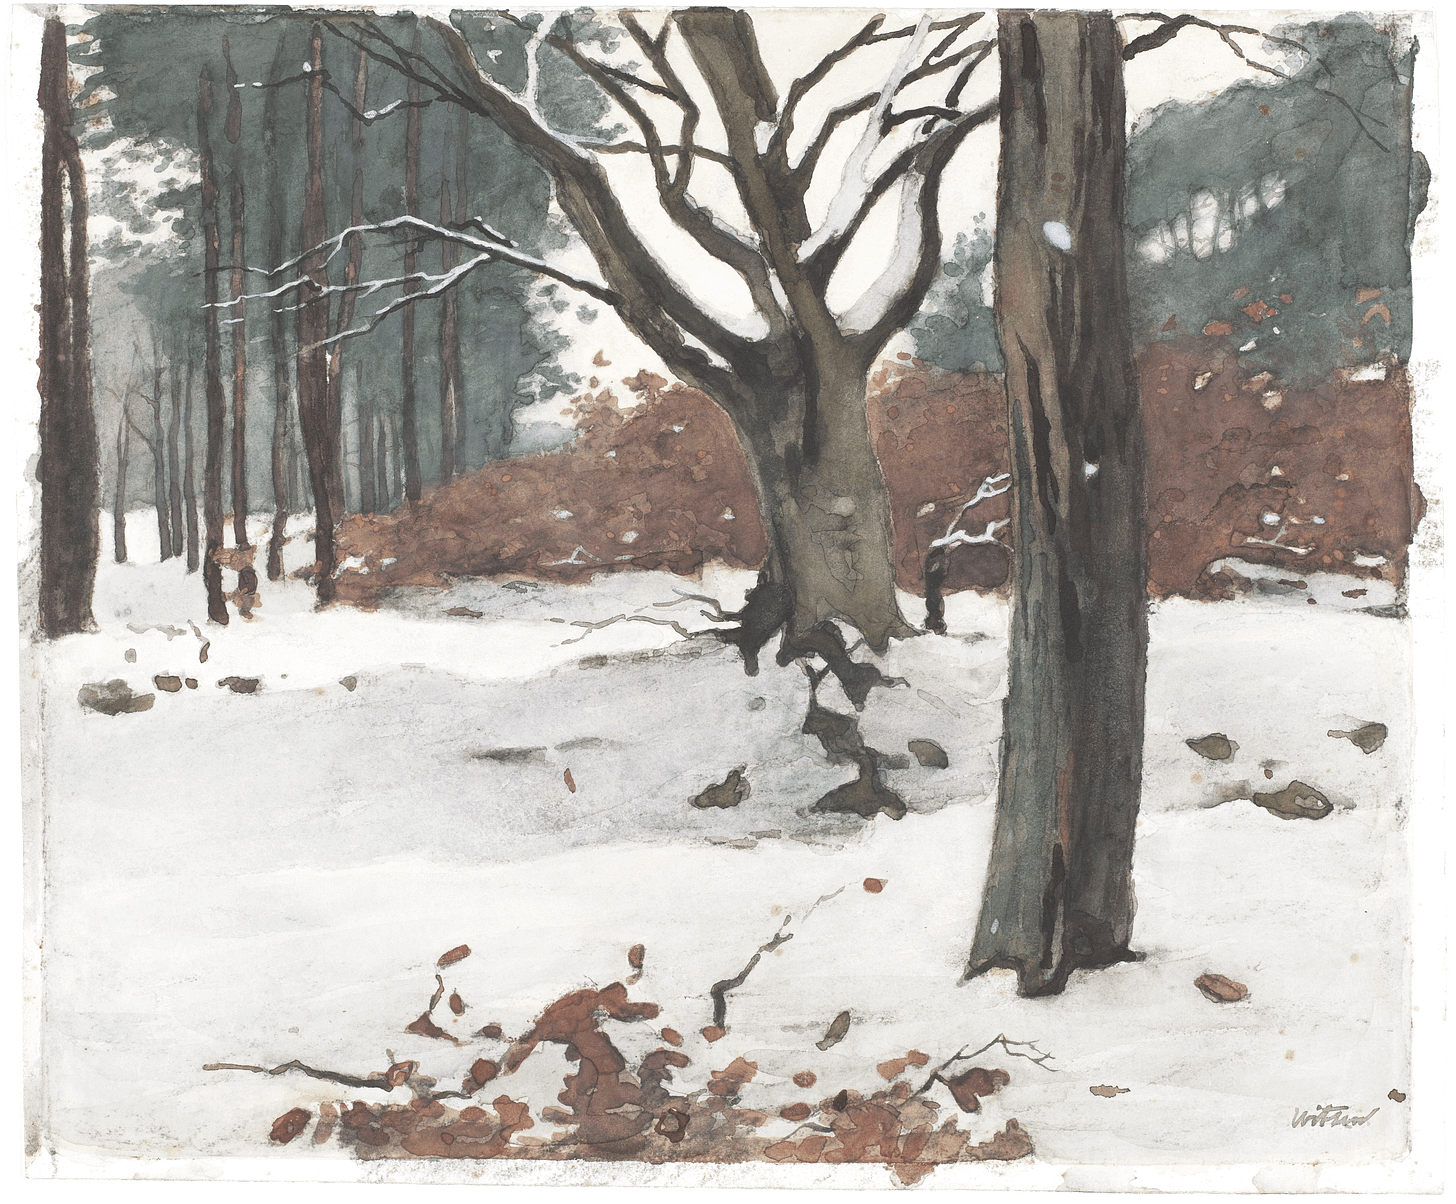 Watercolour painting of a snowy woodland scene, branches and orange leaves are scattered in the foreground as if in the aftermath of a storm. 